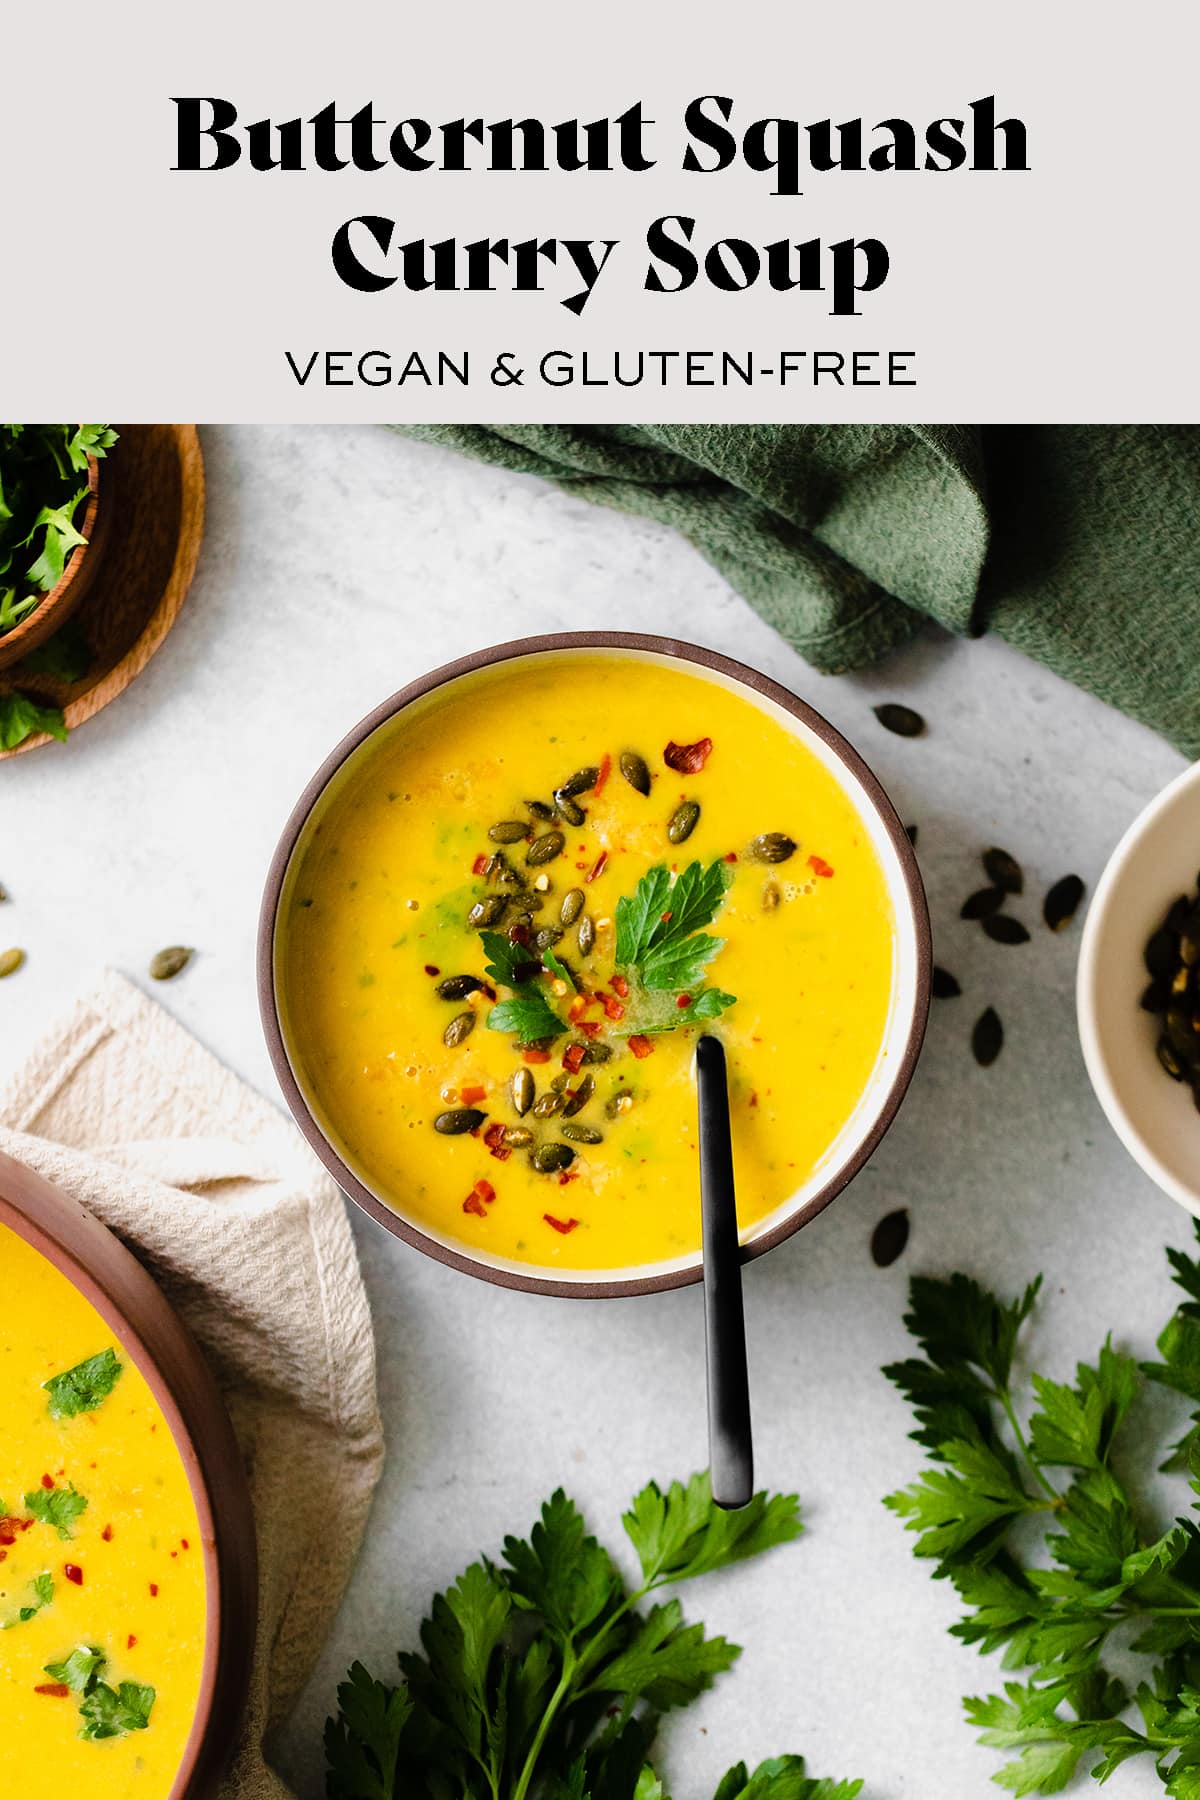 Butternut Squash Curry Soup with Red Lentils (vegan)